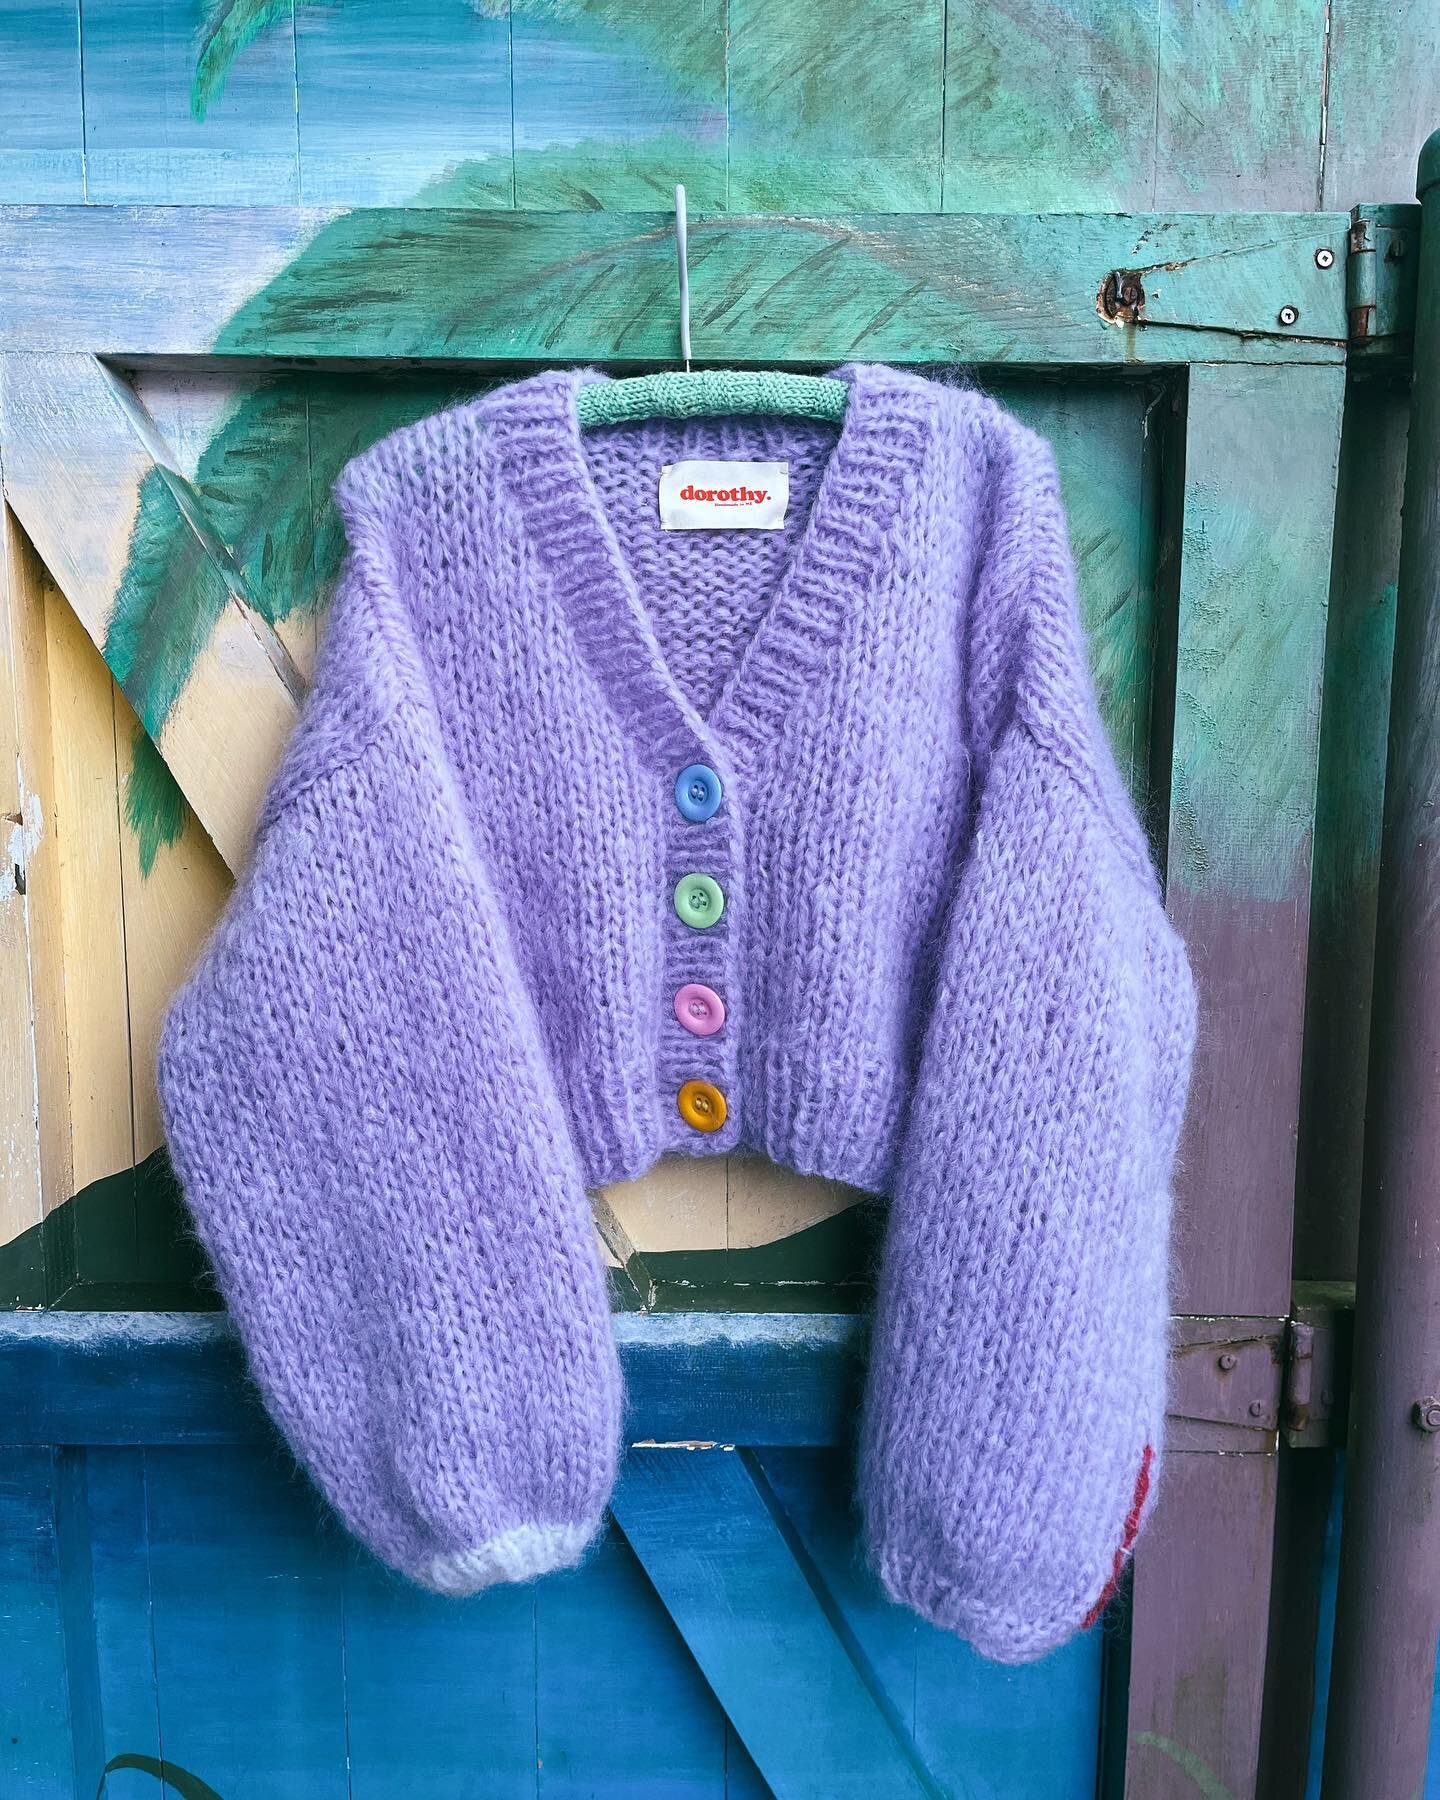 Custom Lilac Cardi with lucky dip buttons. A classic with a twist. 
&bull;
Head to our website to find out more about customer orders.

#dorothynz #customorders